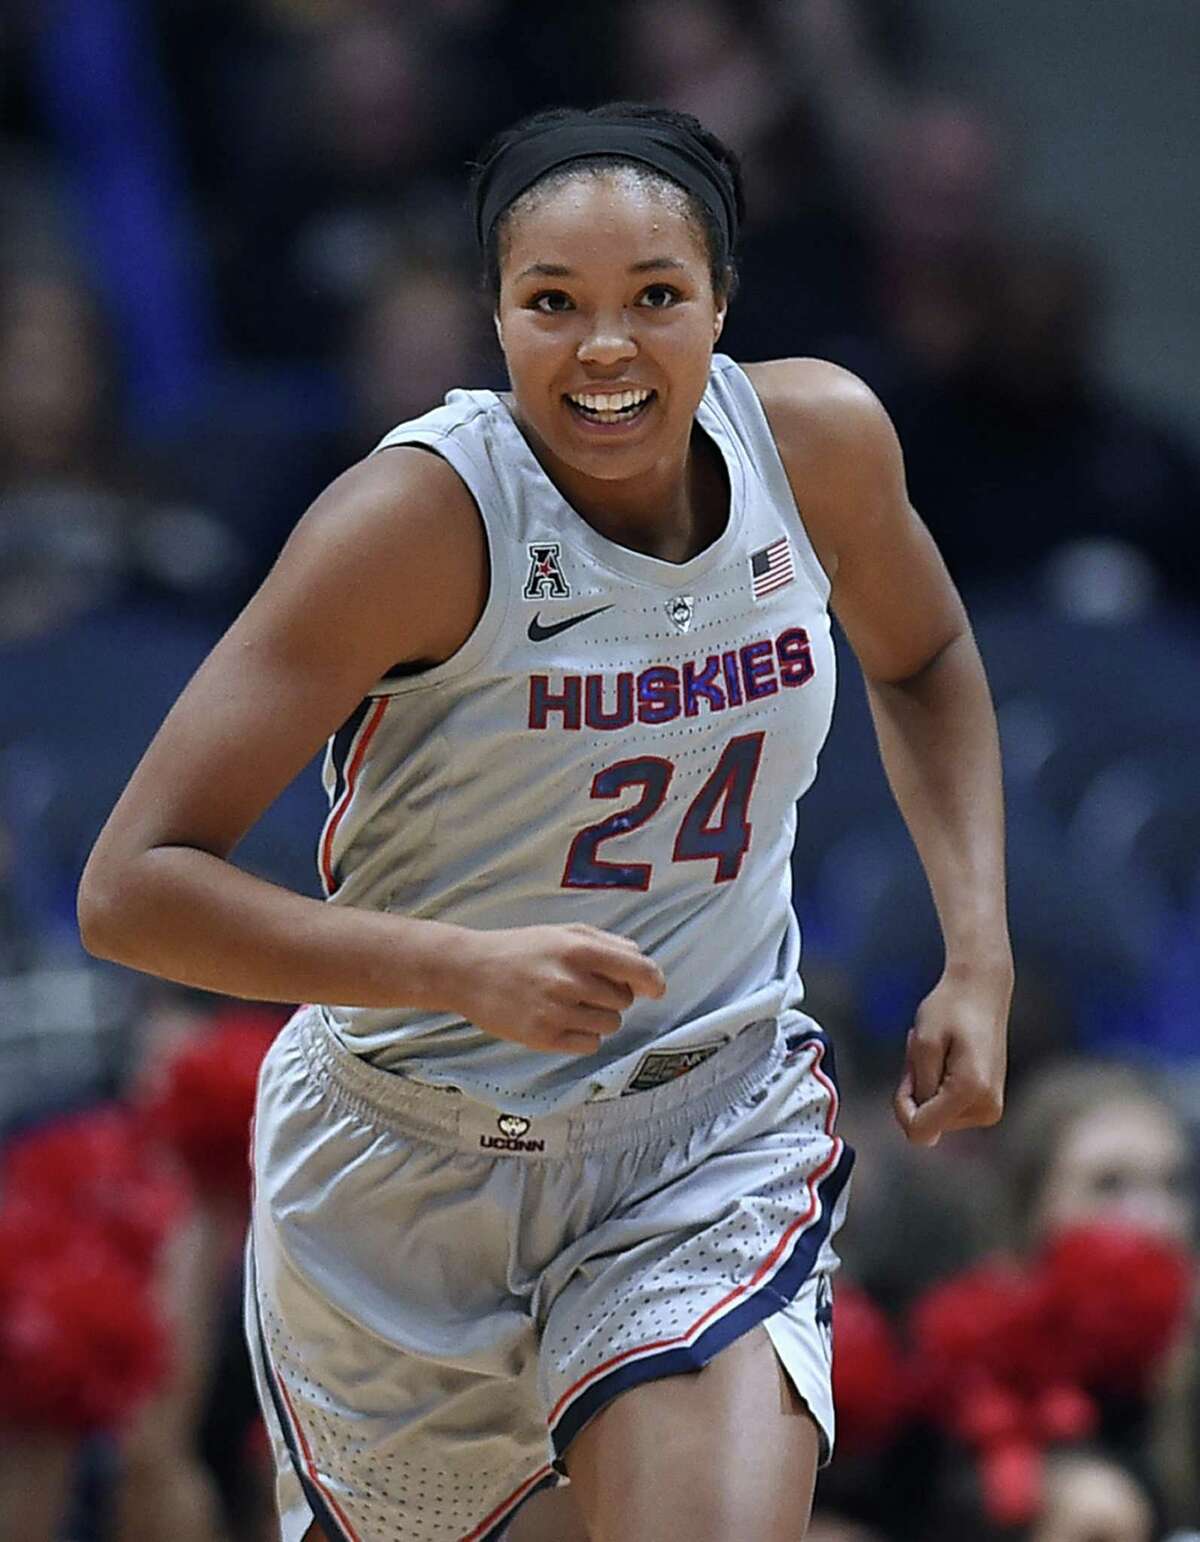 UConn’s Napheesa Collier entered her senior season with 1,609 points and 808 rebounds.